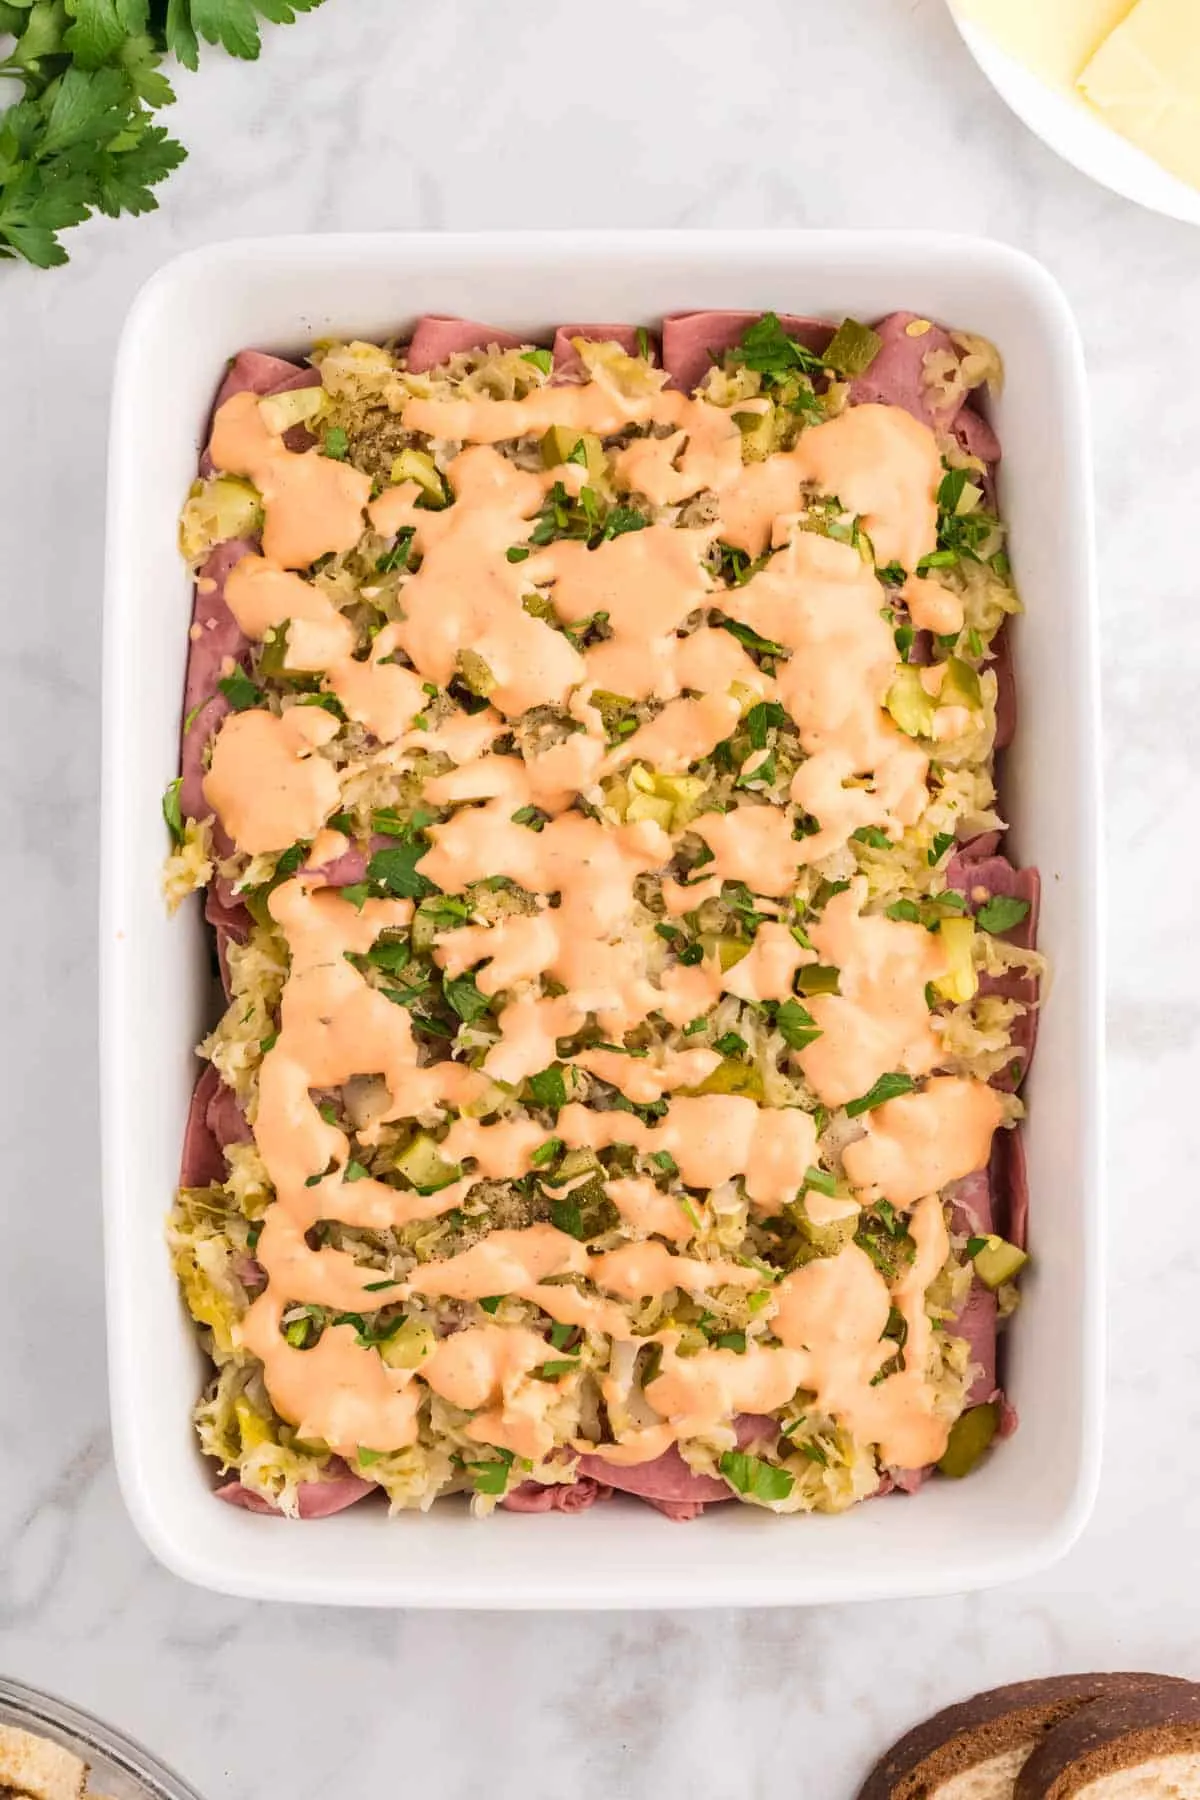 Thousand Island dressing on top of chopped pickles, sauerkraut and corned beef in a casserole dish